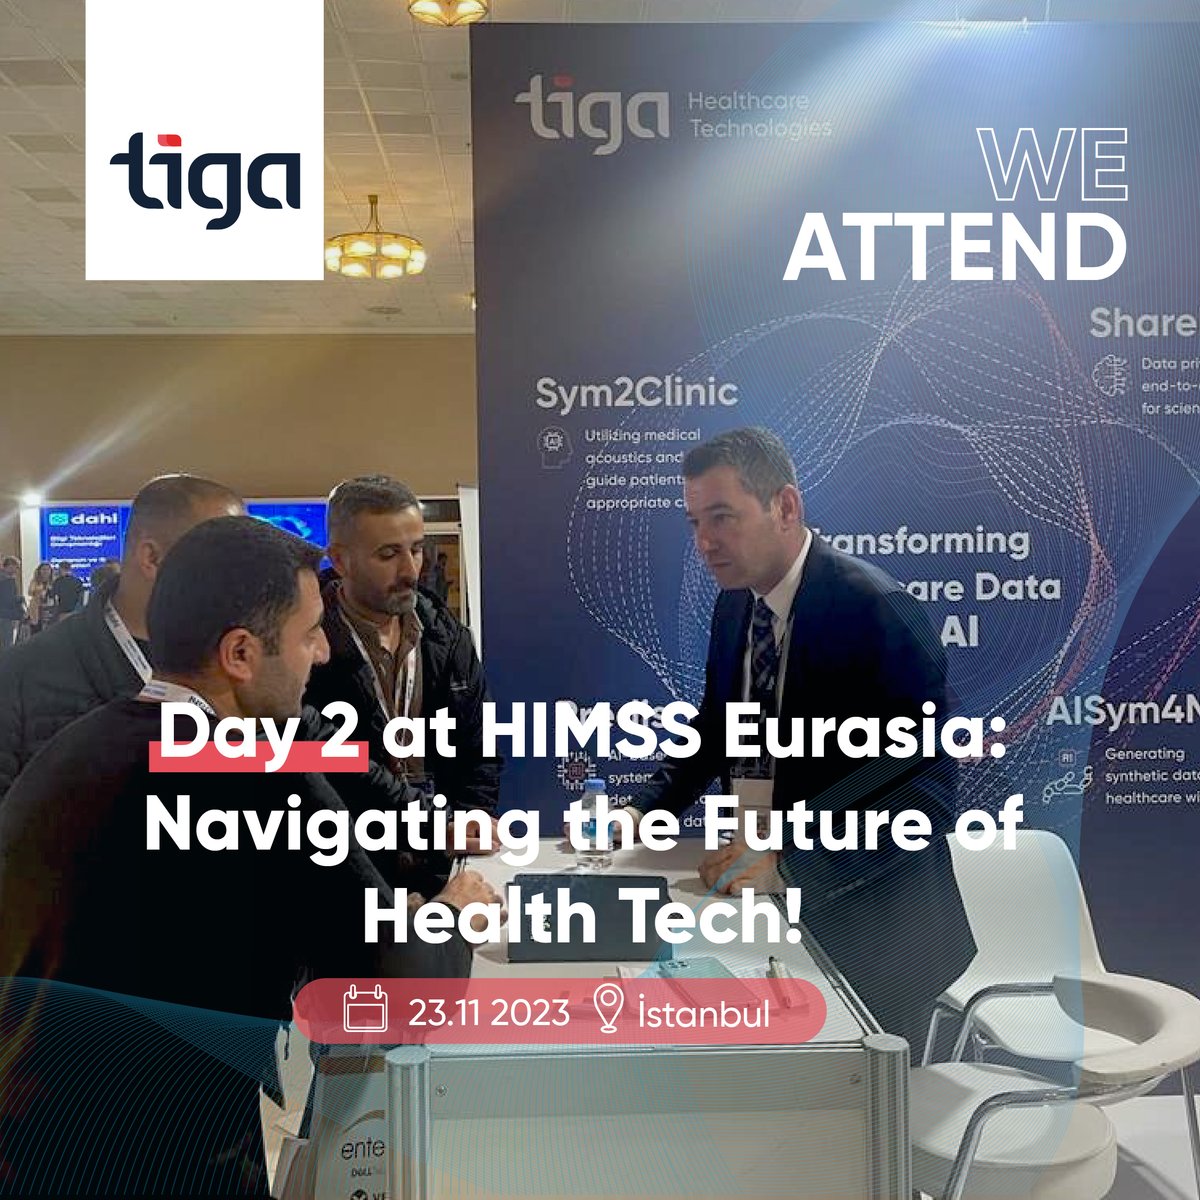 We continue to make strides on the second day of HIMSS Eurasia. Today's focus was on 'The Use of #AI in Establishing #Sustainable Systems,' a critical area for future #healthcare.

#TigaHealth #HealthcareIT #PharmaIT #HIMSS2023